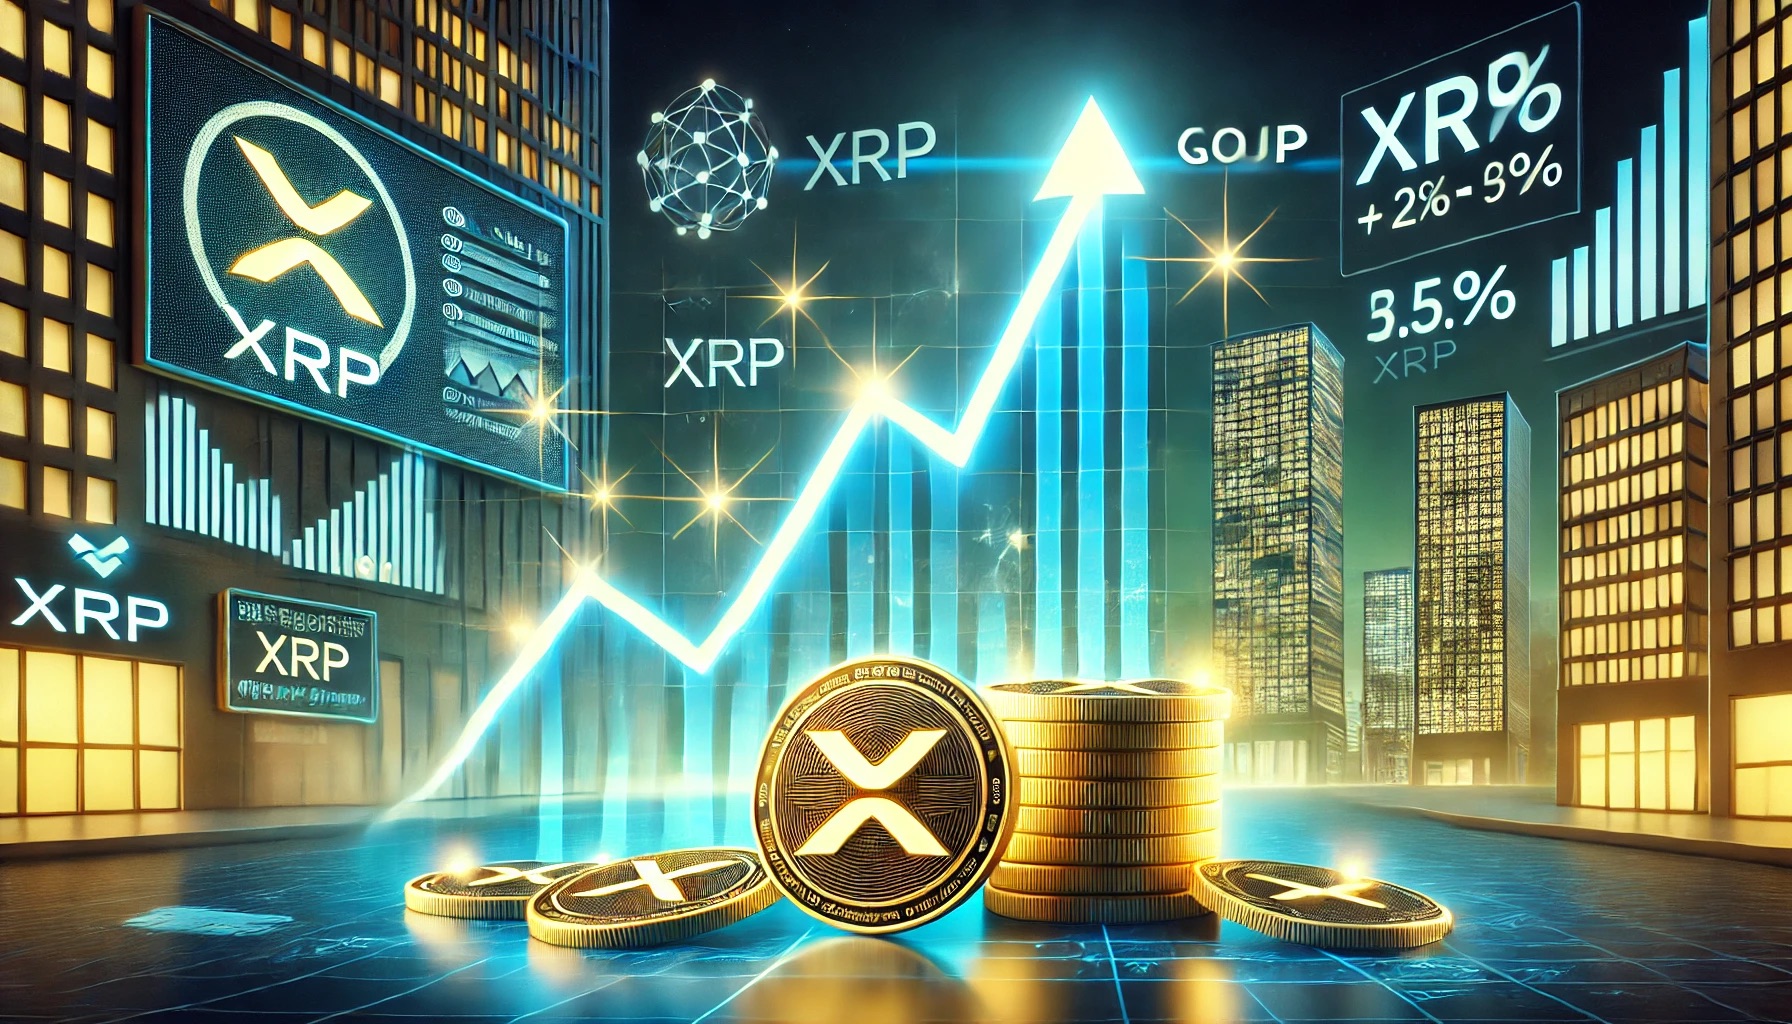 Triangle Formation That Sparked The 2017 XRP Rally Returns, What’s The Target?